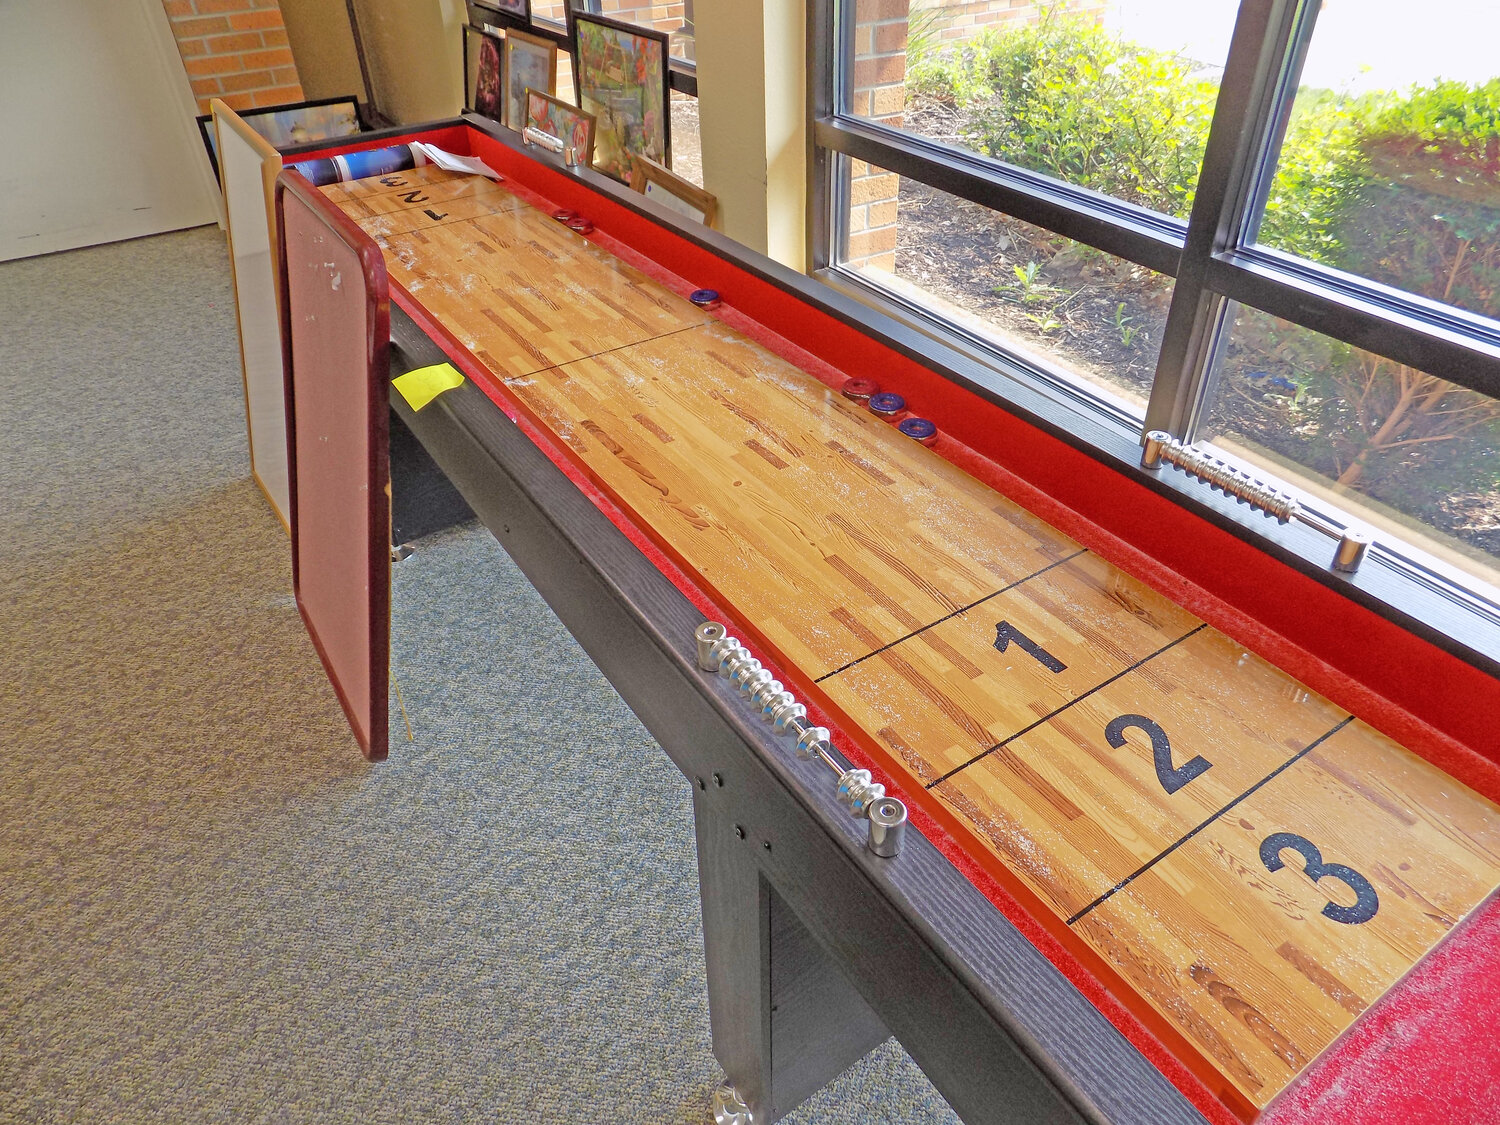 A shuffleboard was an early seller at the yard sale.